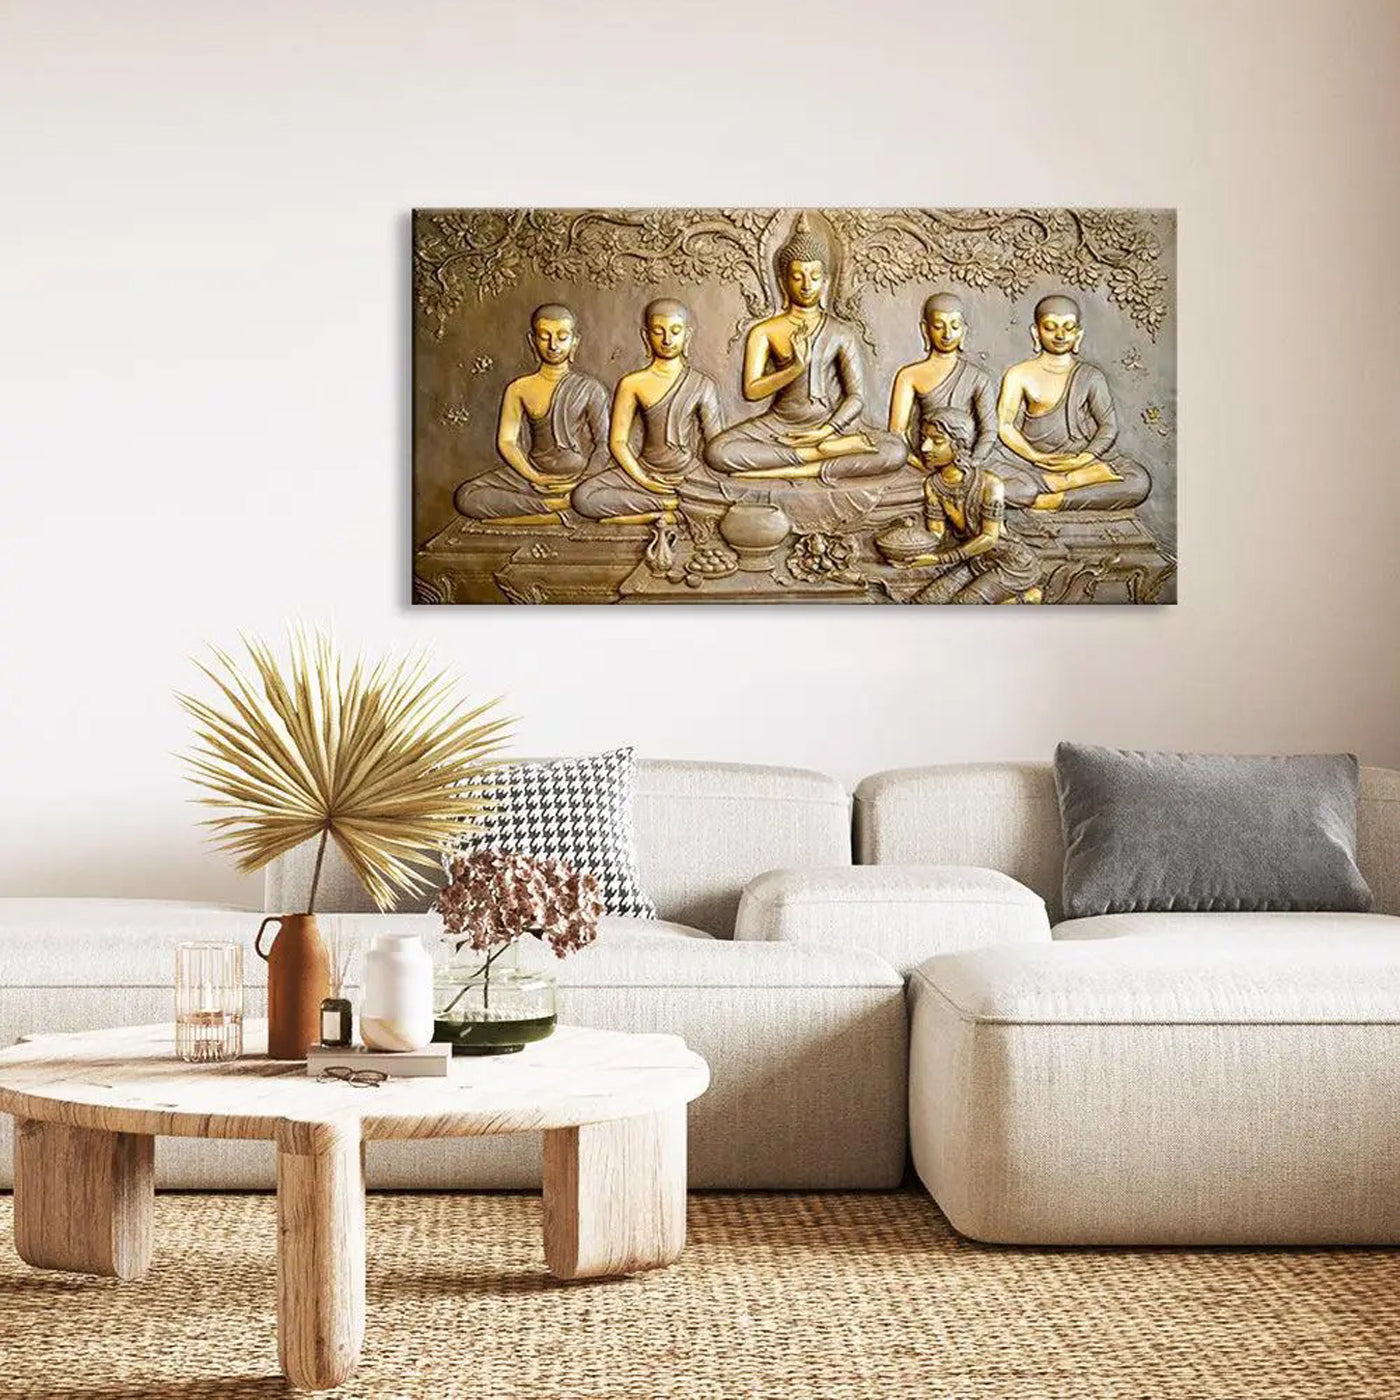 Meditating Buddha Wall Art Canvas Painting for Your Home and Office Decor (48 x 24 ) Inch